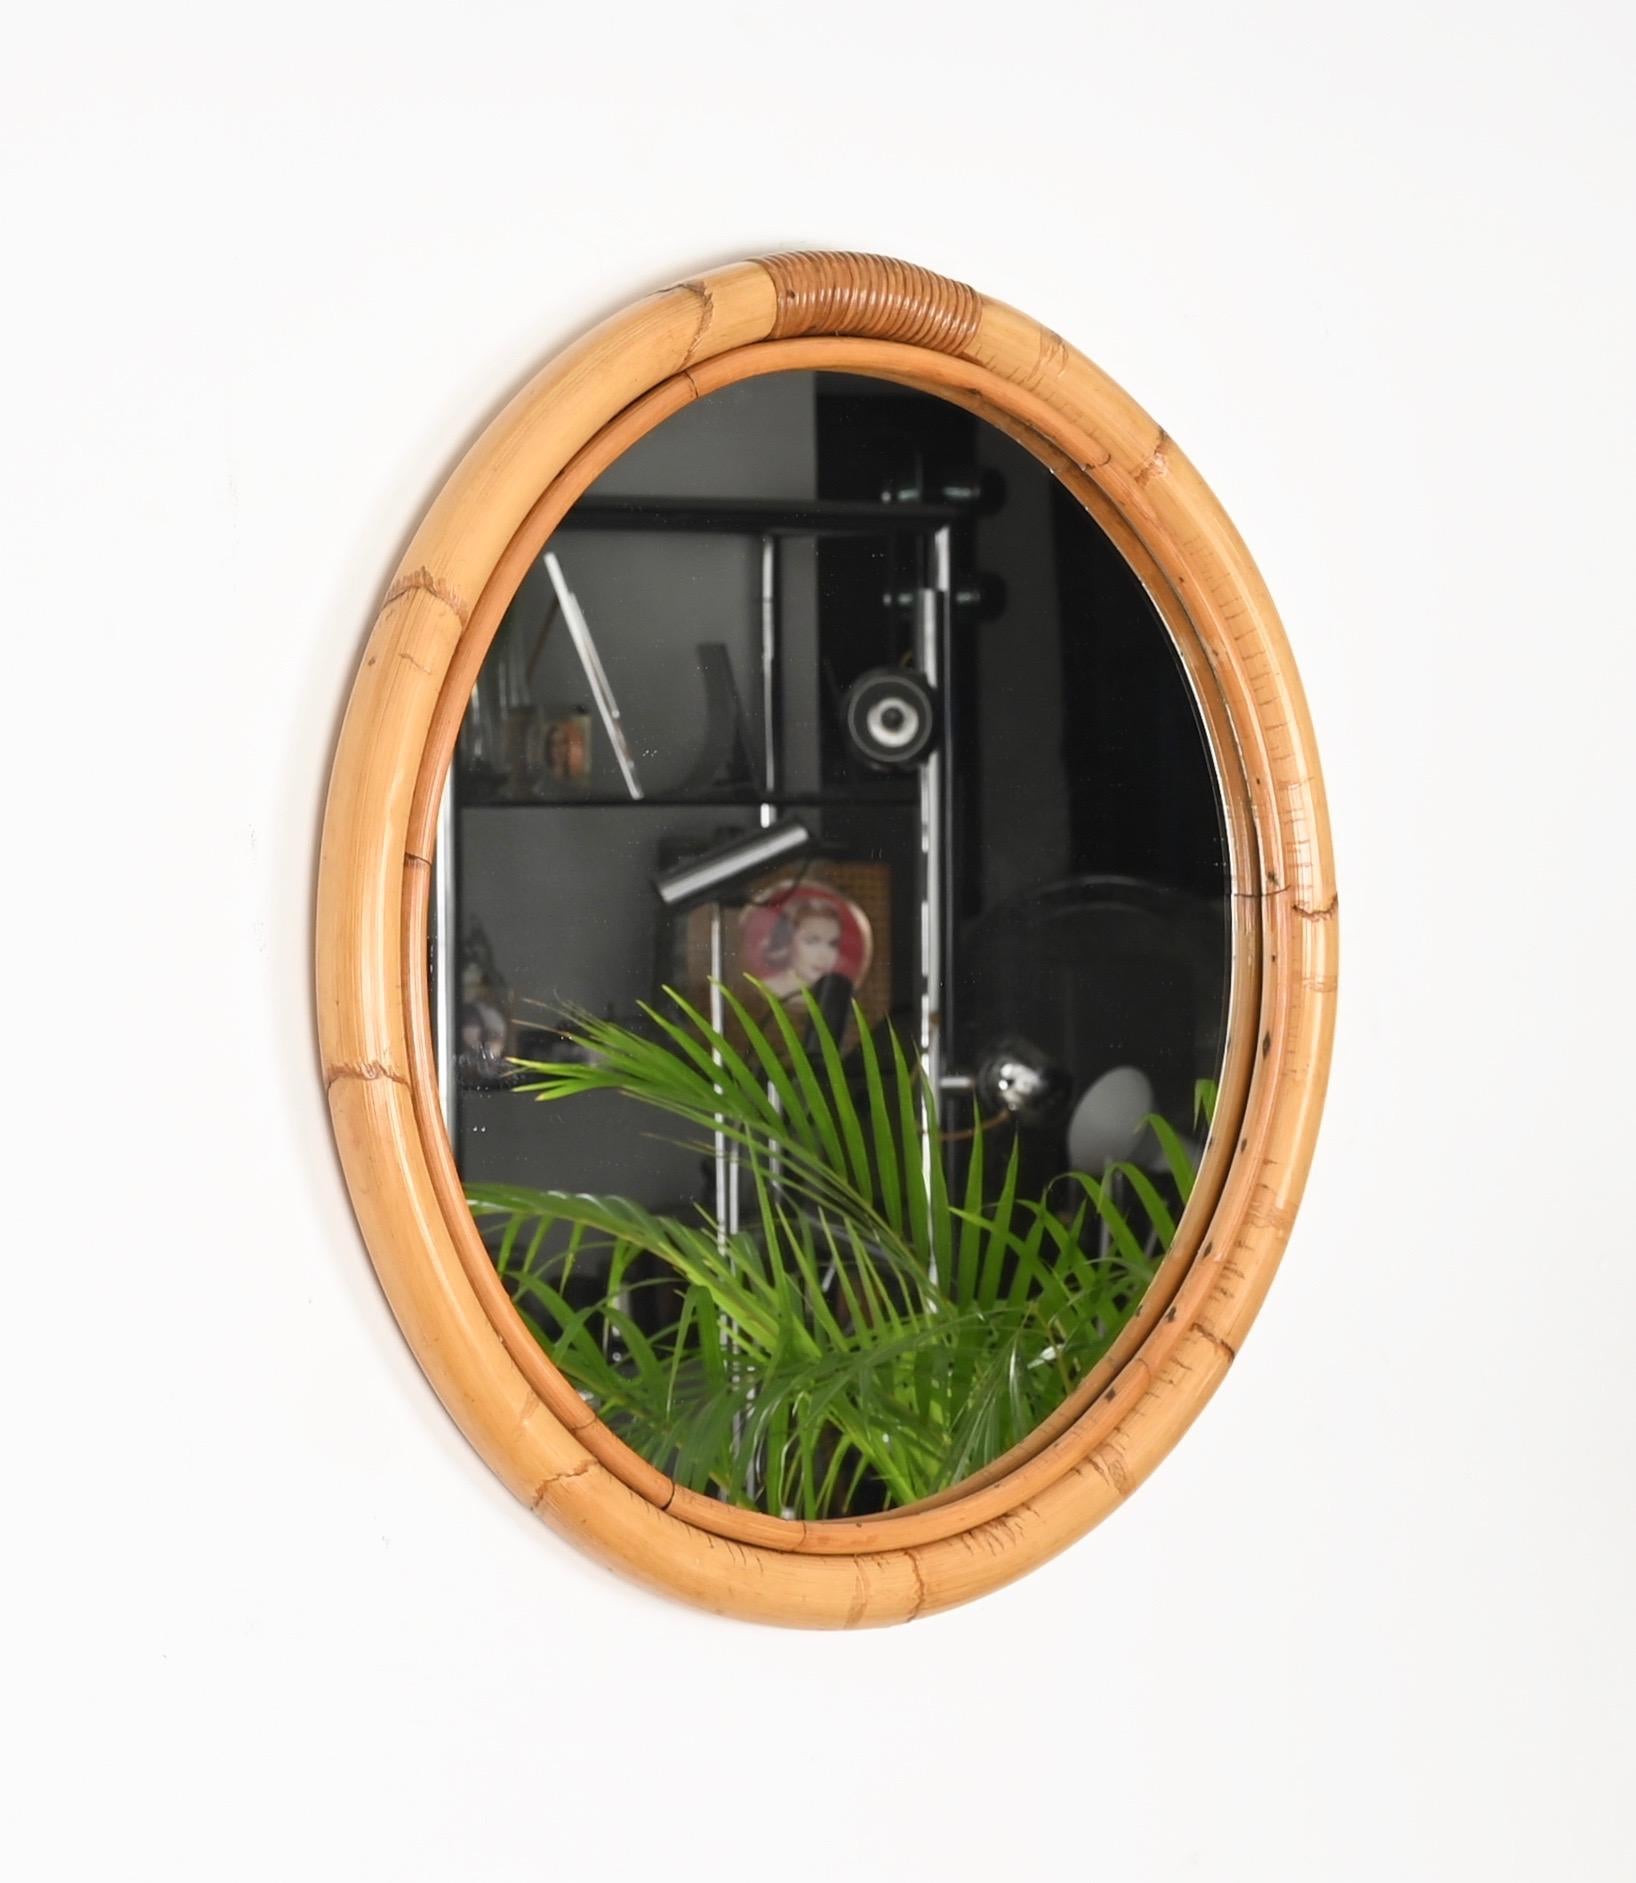 Beautiful Mid-Century round mirror with a double frame in curved bamboo canes and woven wicker. This fantastic item was produced in Italy in the 1970s.

The mirror features a double round frame, the external one in curved bamboo and the inside one